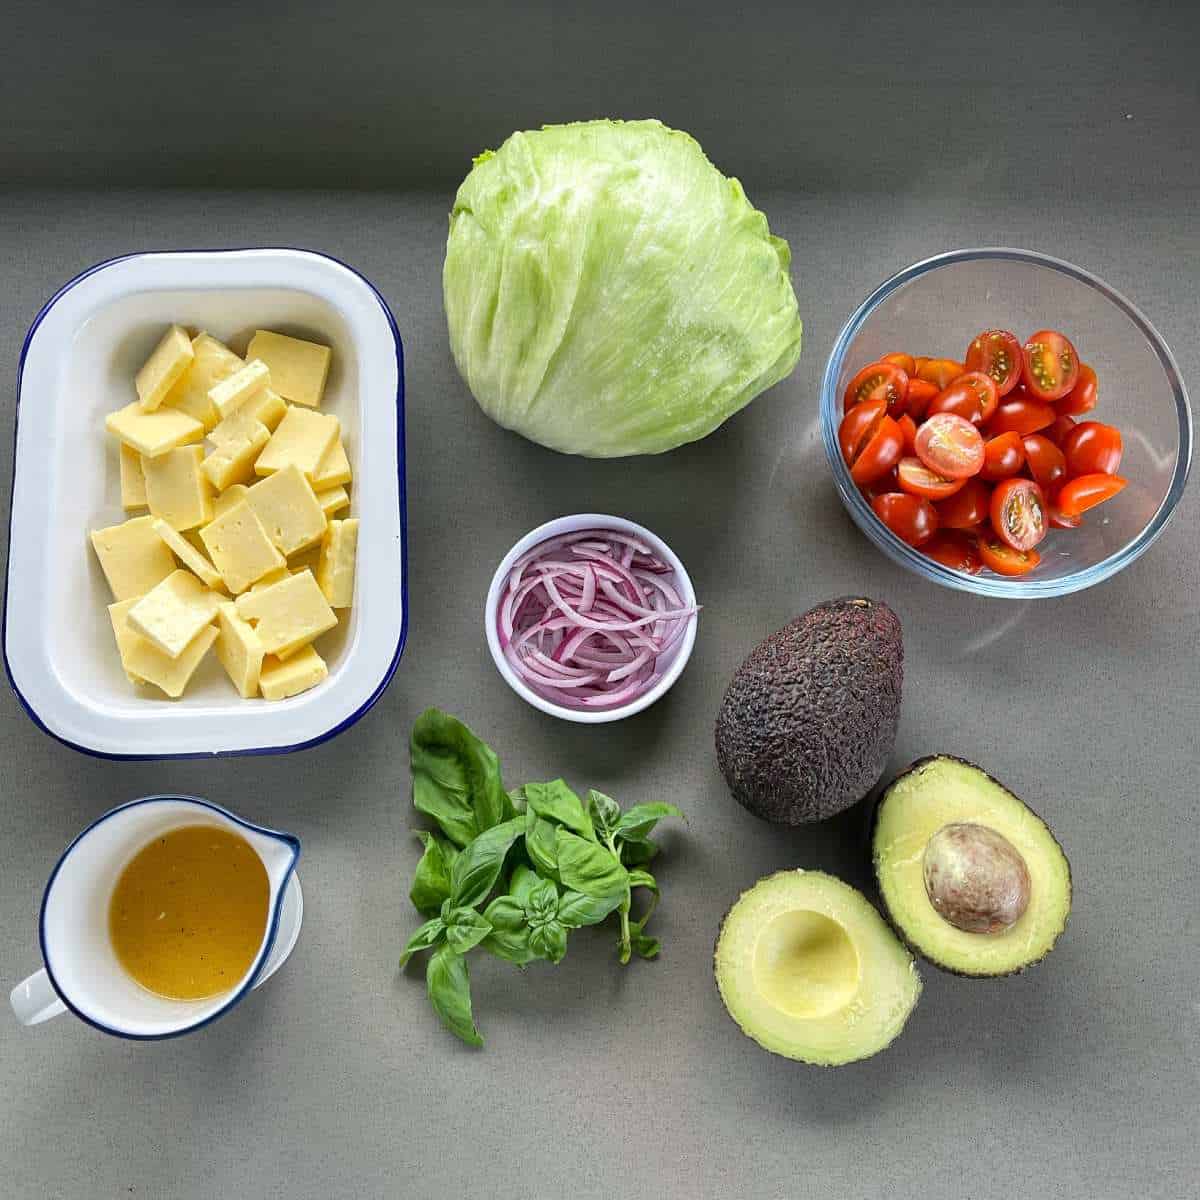 The ingredients for haloumi and avocado salad on a grey bench.